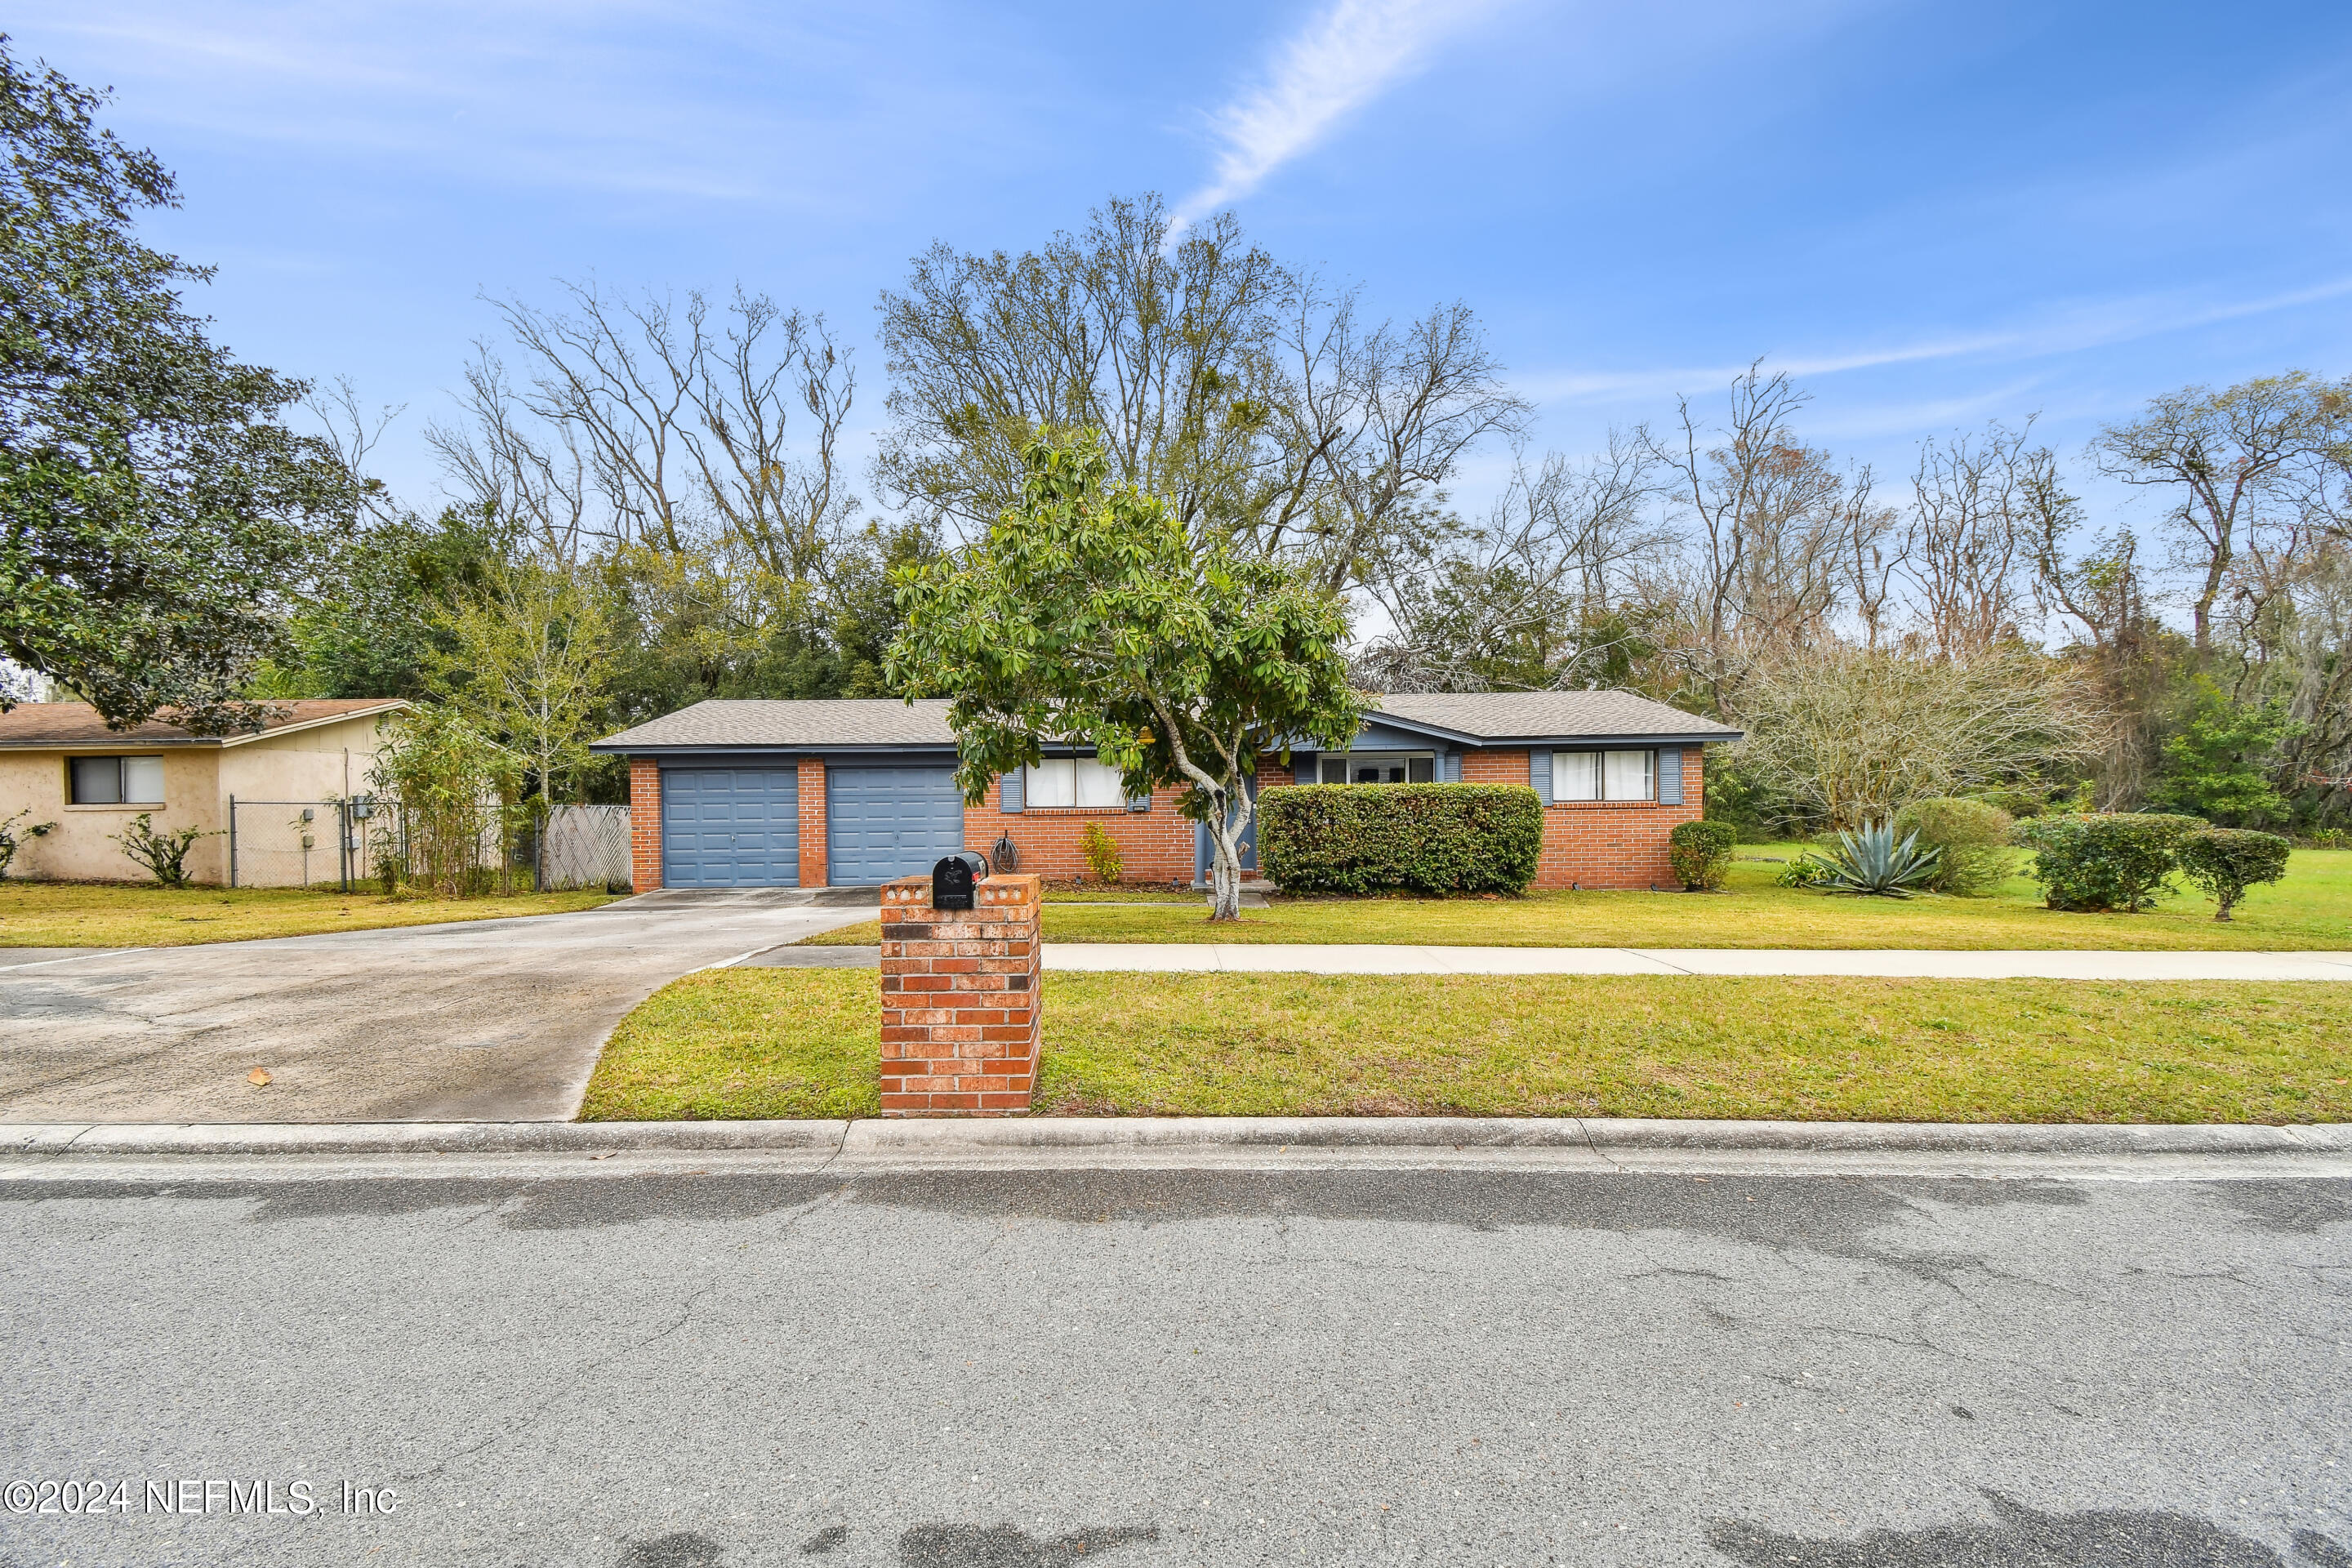 Jacksonville, FL home for sale located at 8657 MOSS HAVEN Road, Jacksonville, FL 32221